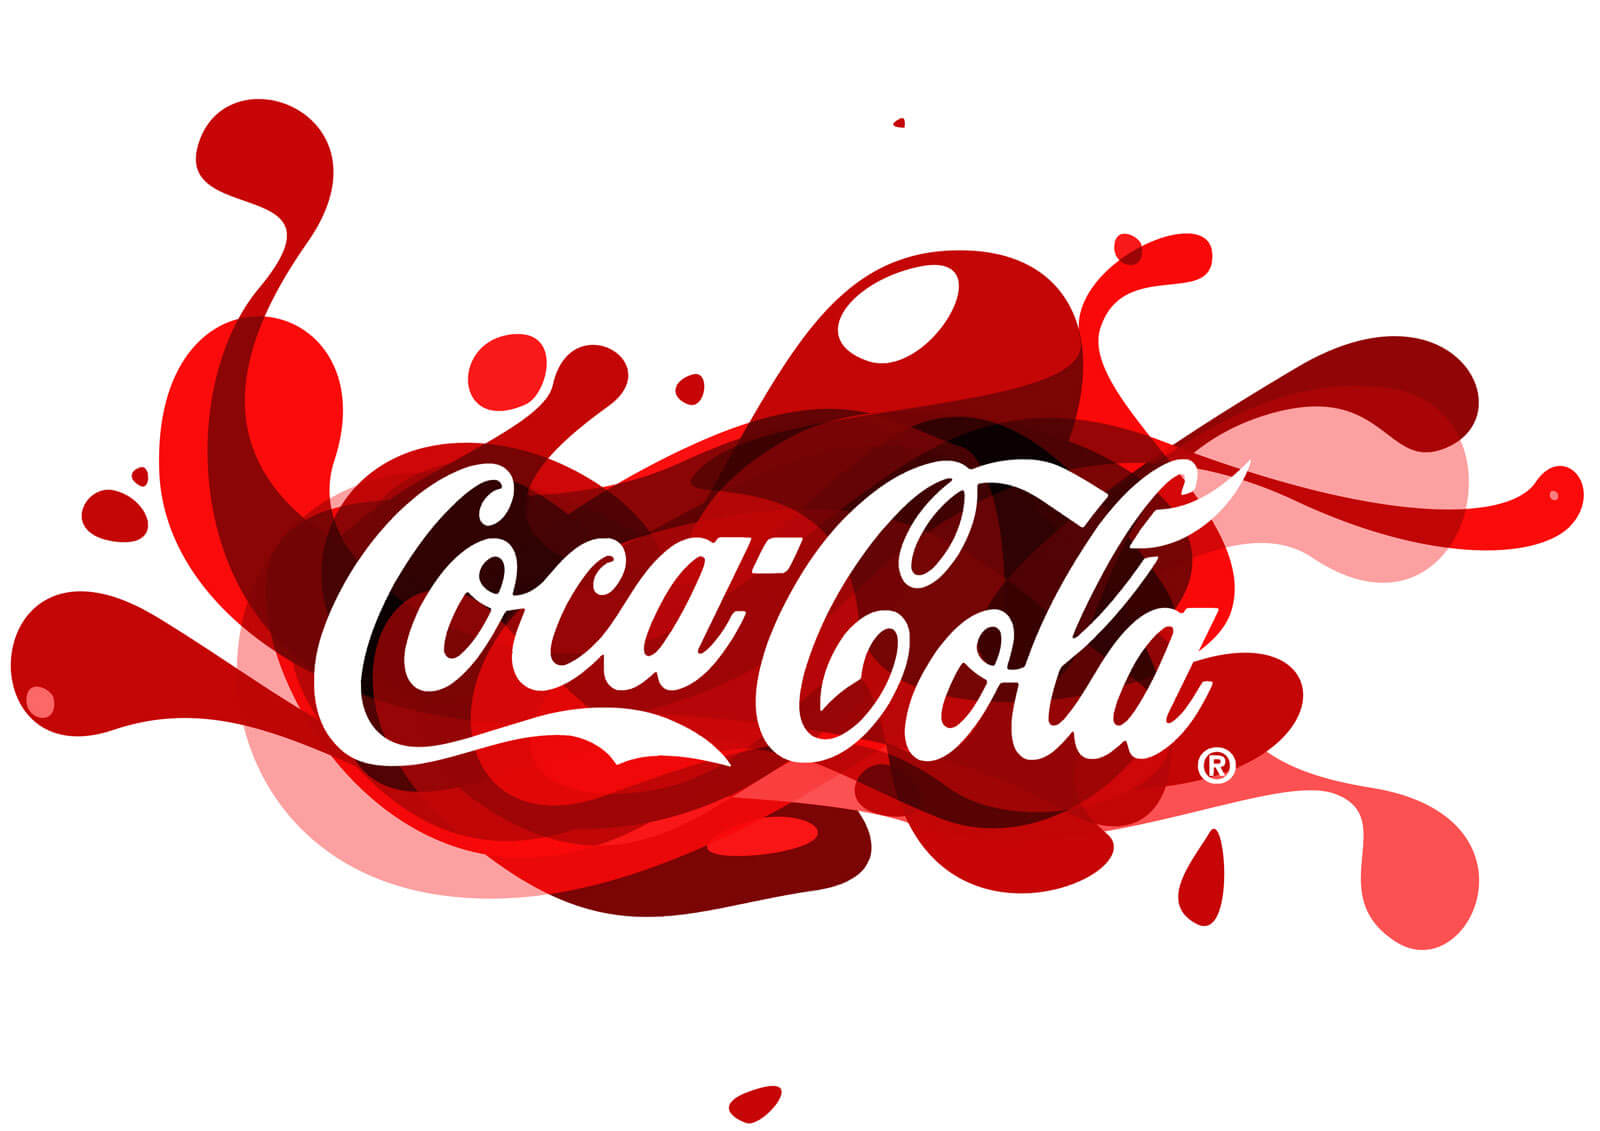 Coca Cola Free Ppt Backgrounds For Your Powerpoint Templates With Regard To Coca Cola Powerpoint Template